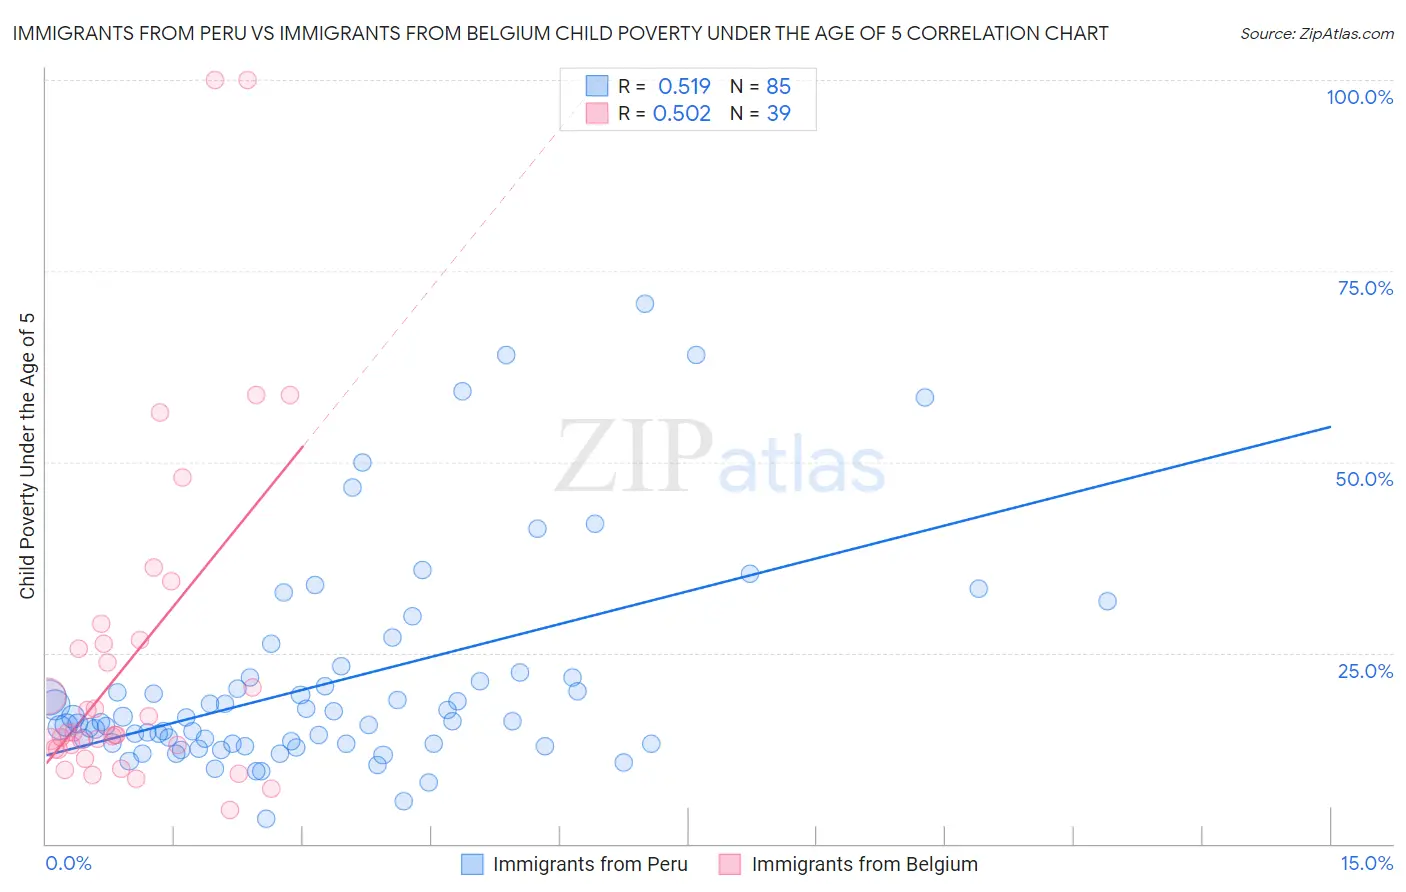 Immigrants from Peru vs Immigrants from Belgium Child Poverty Under the Age of 5